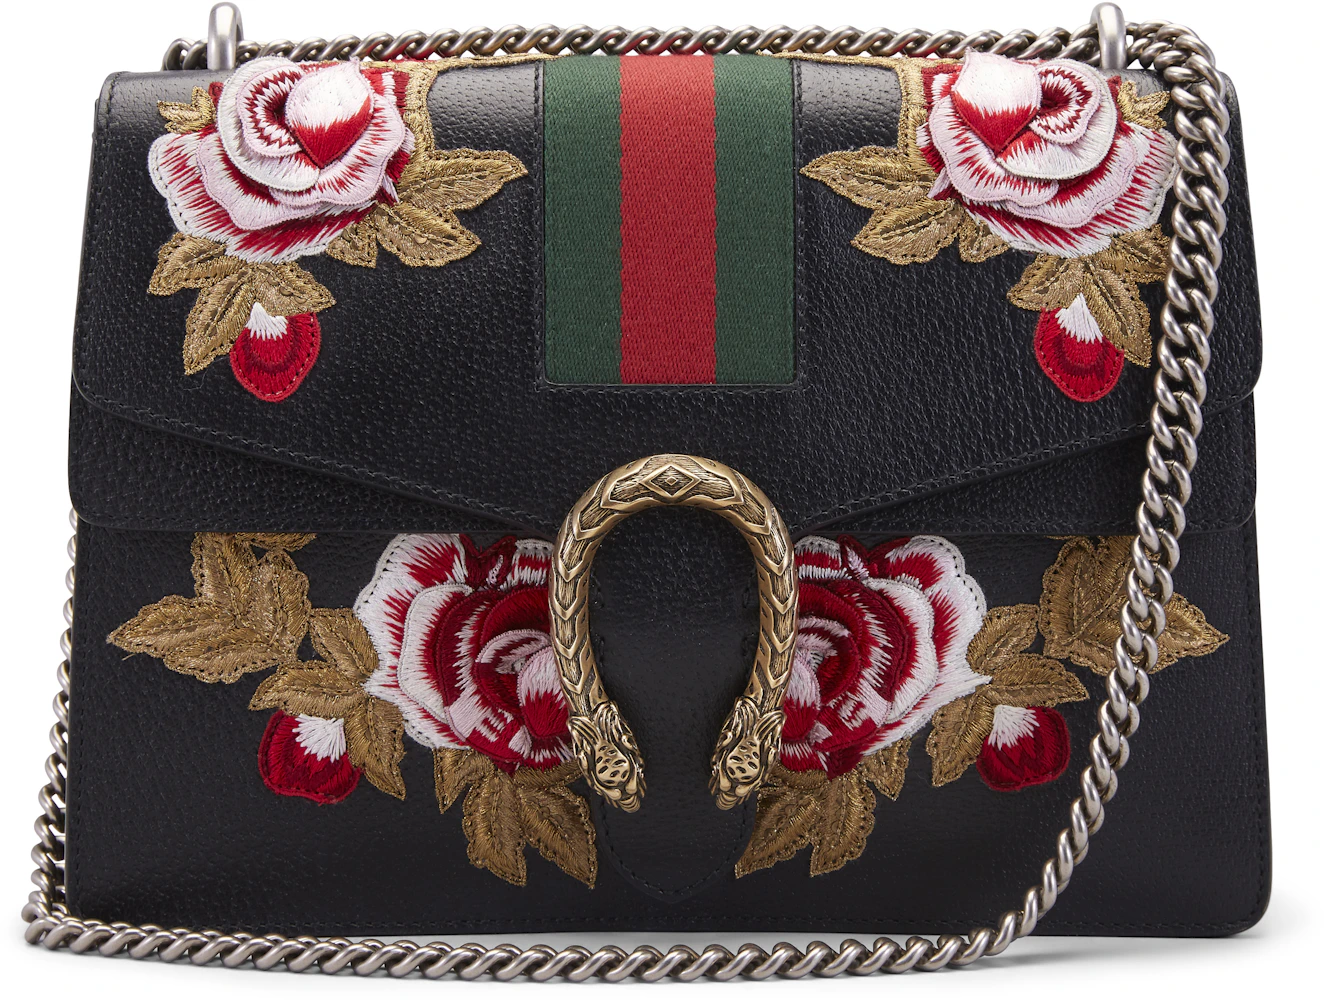 Gucci Small Sylvie Floral Embroidered Snakeskin Bag